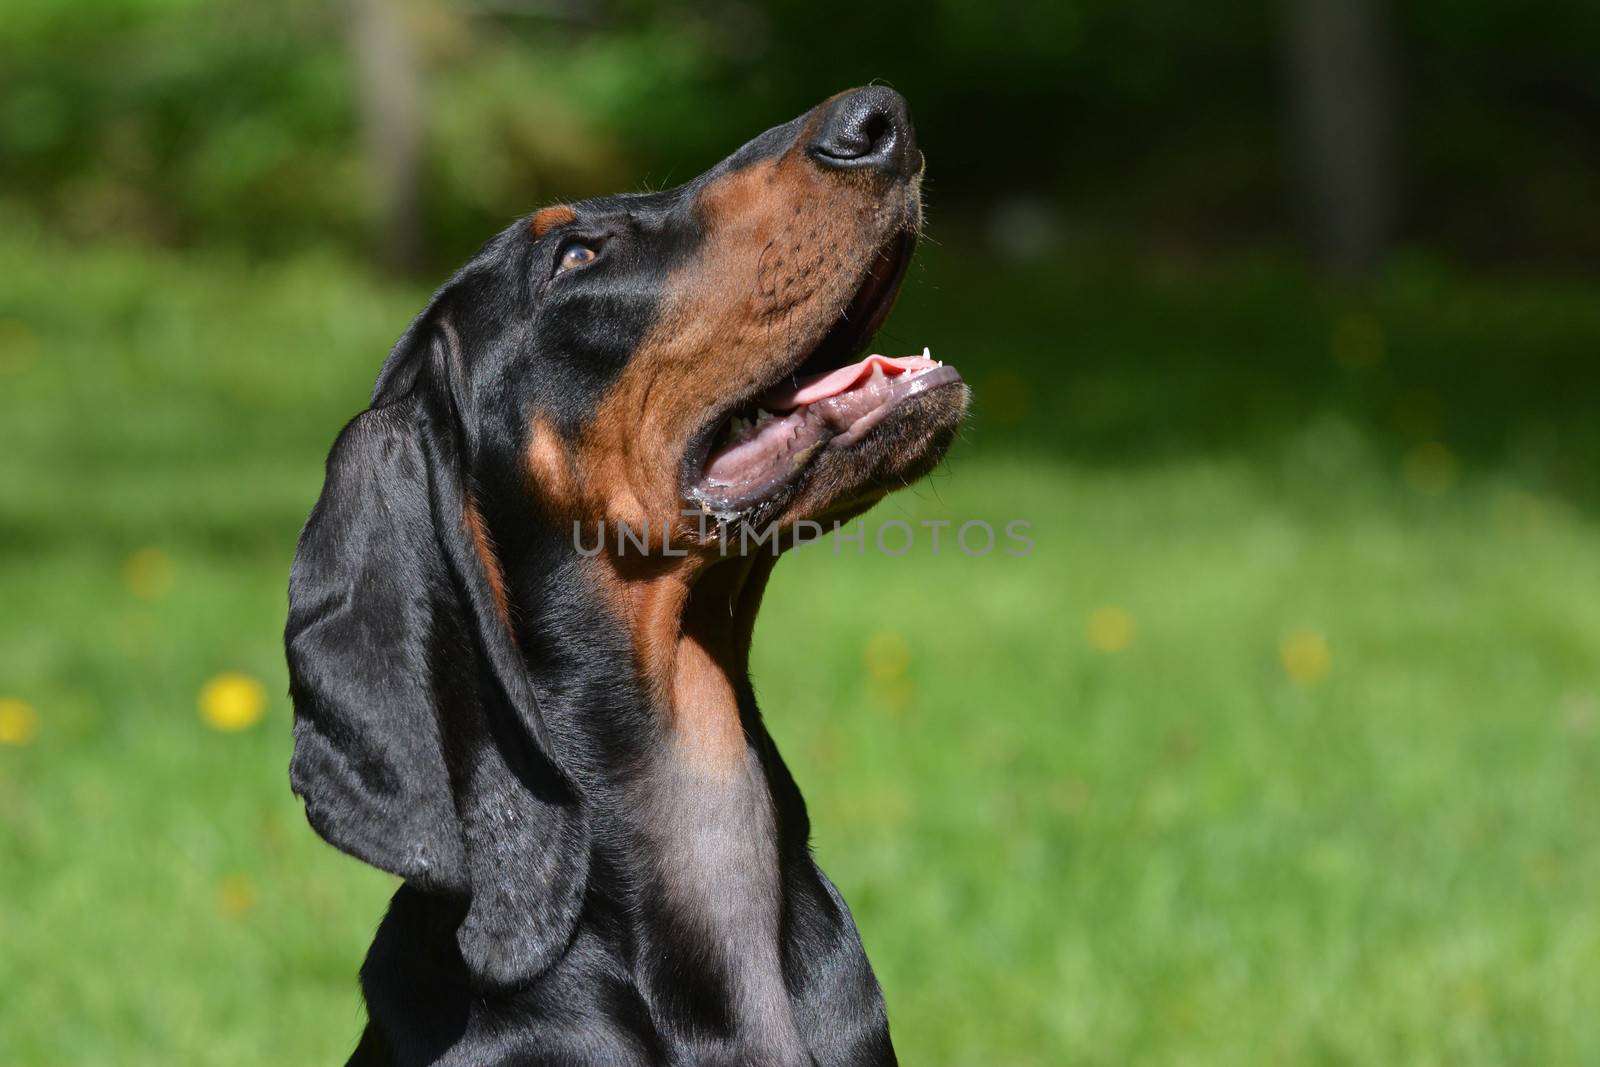 black and tan coonhound portrait outdoors